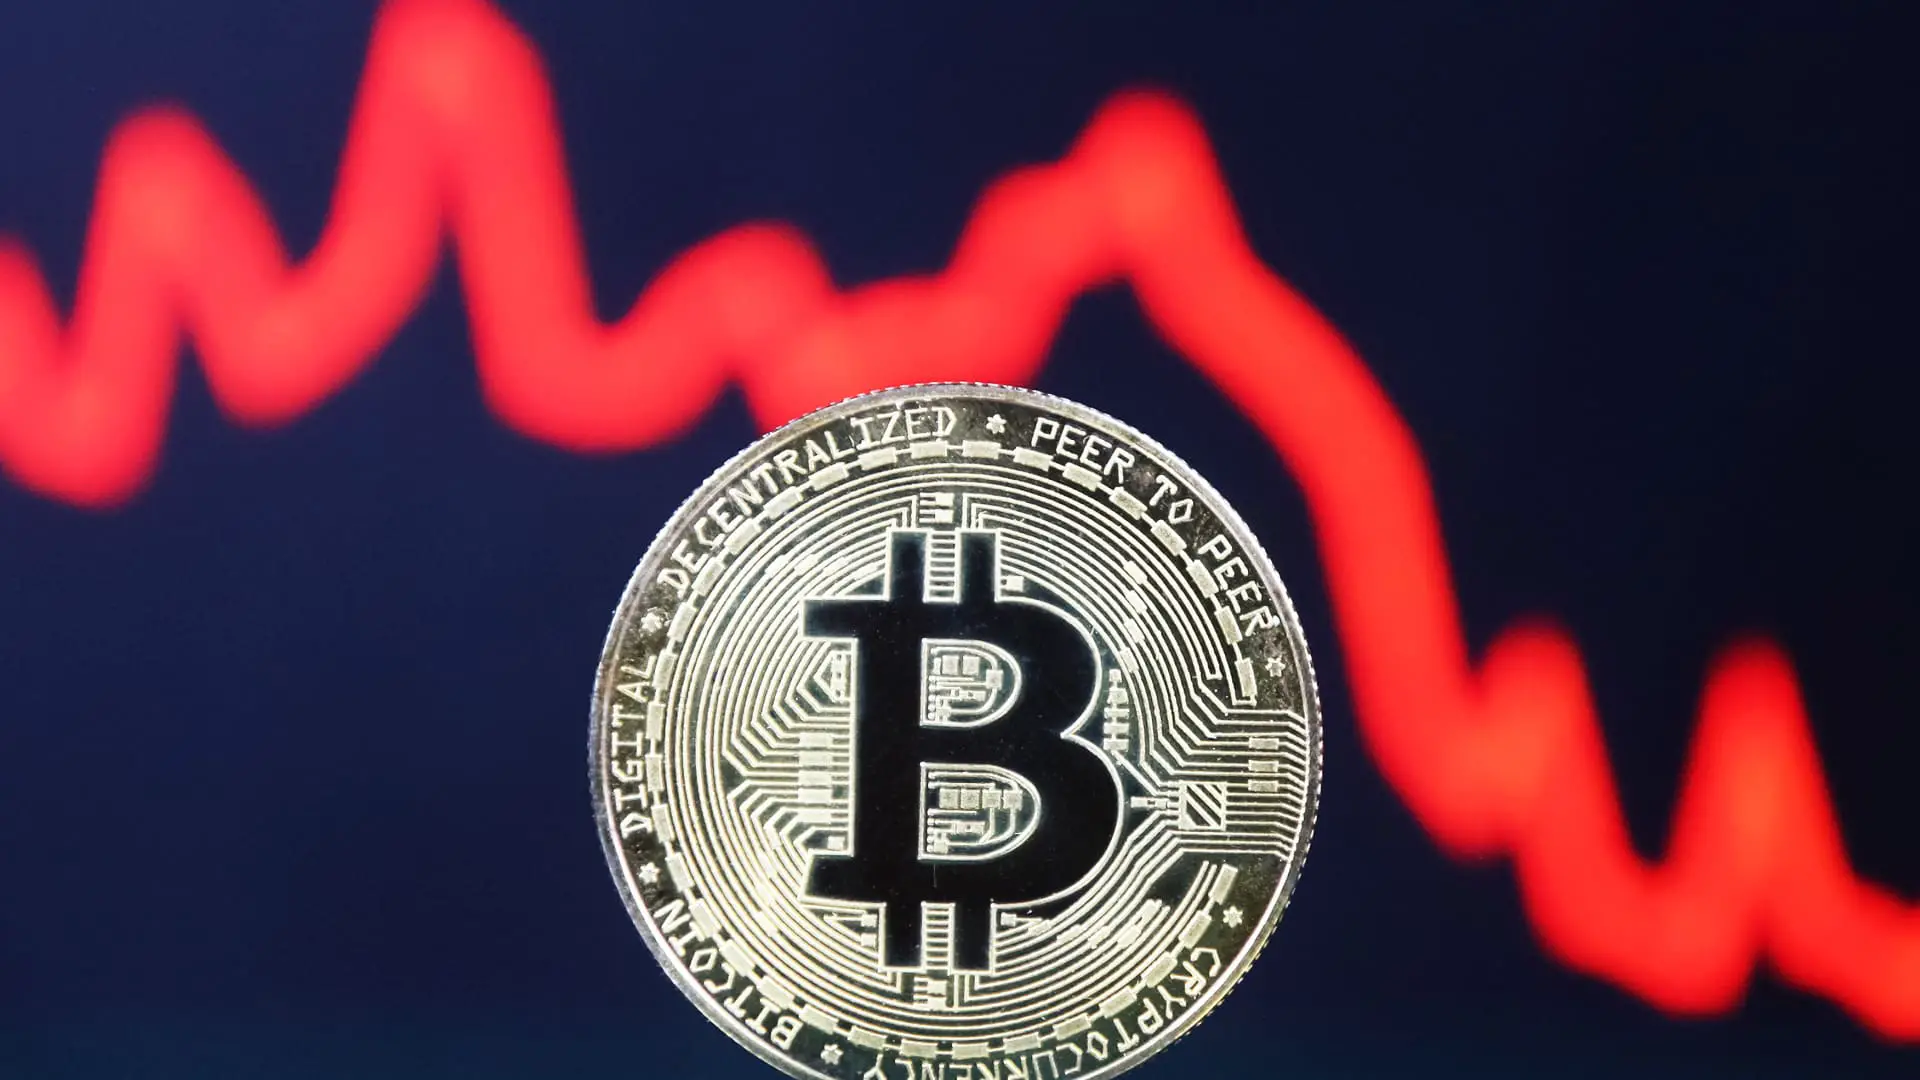 What to learn about investing in cryptocurrency amid volatility